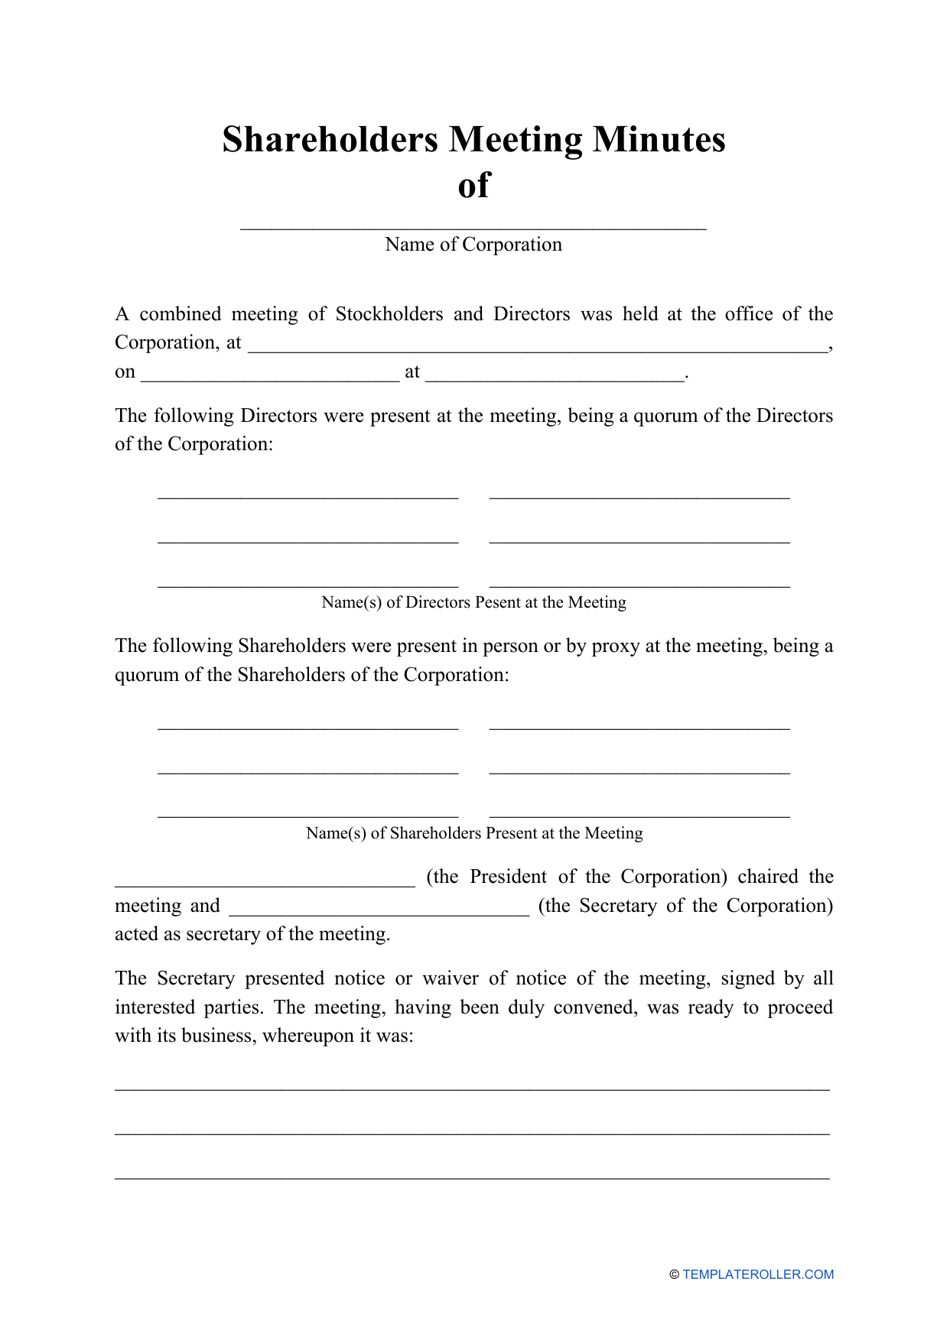 Shareholders Meeting Minutes Template, Page 1